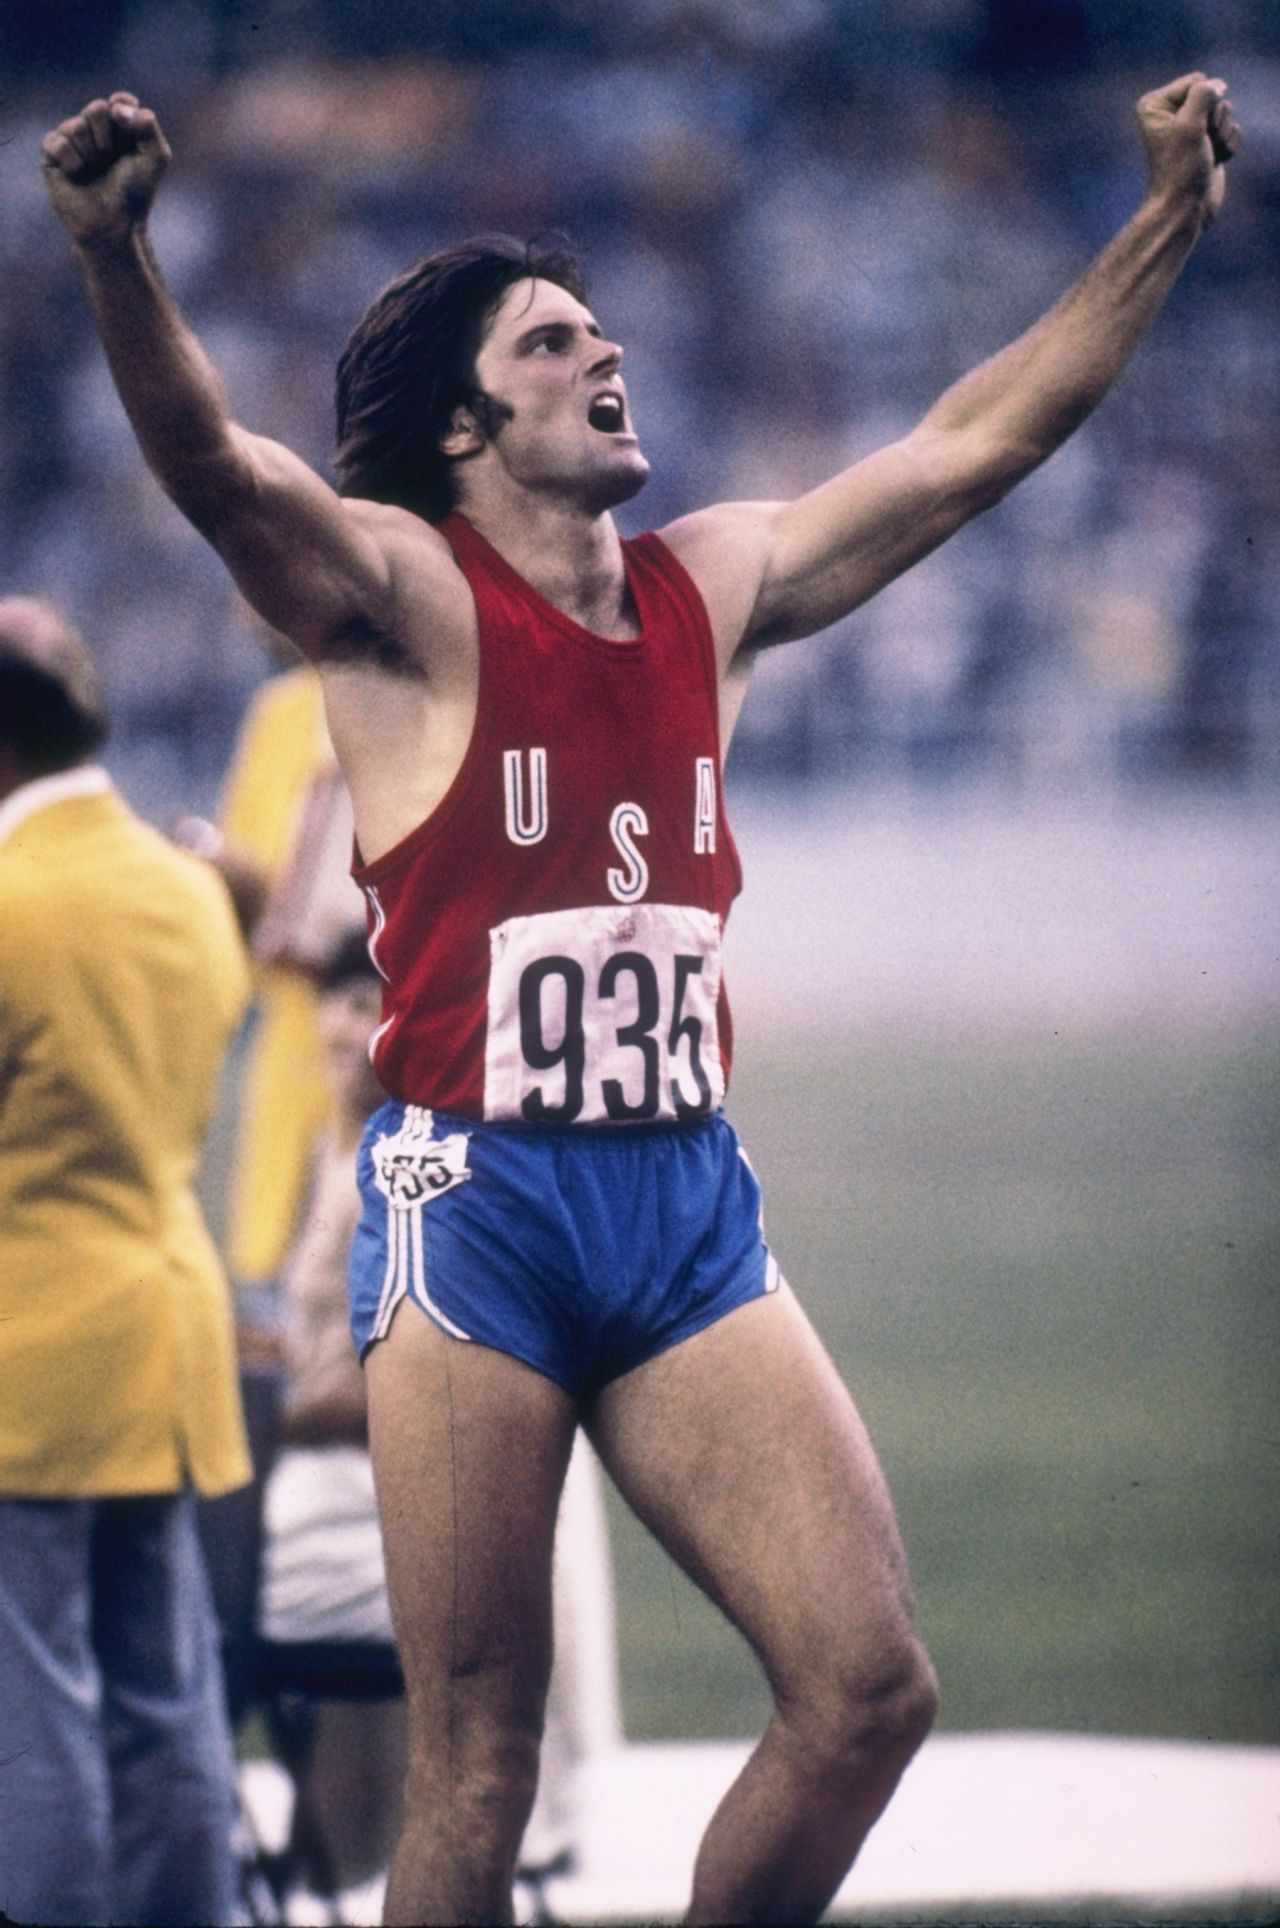 Jenner, formerly Bruce, celebrates a record-setting decathlon performance at the 1976 Summer Olympics in Montreal. The victory made Jenner an instant sensation.